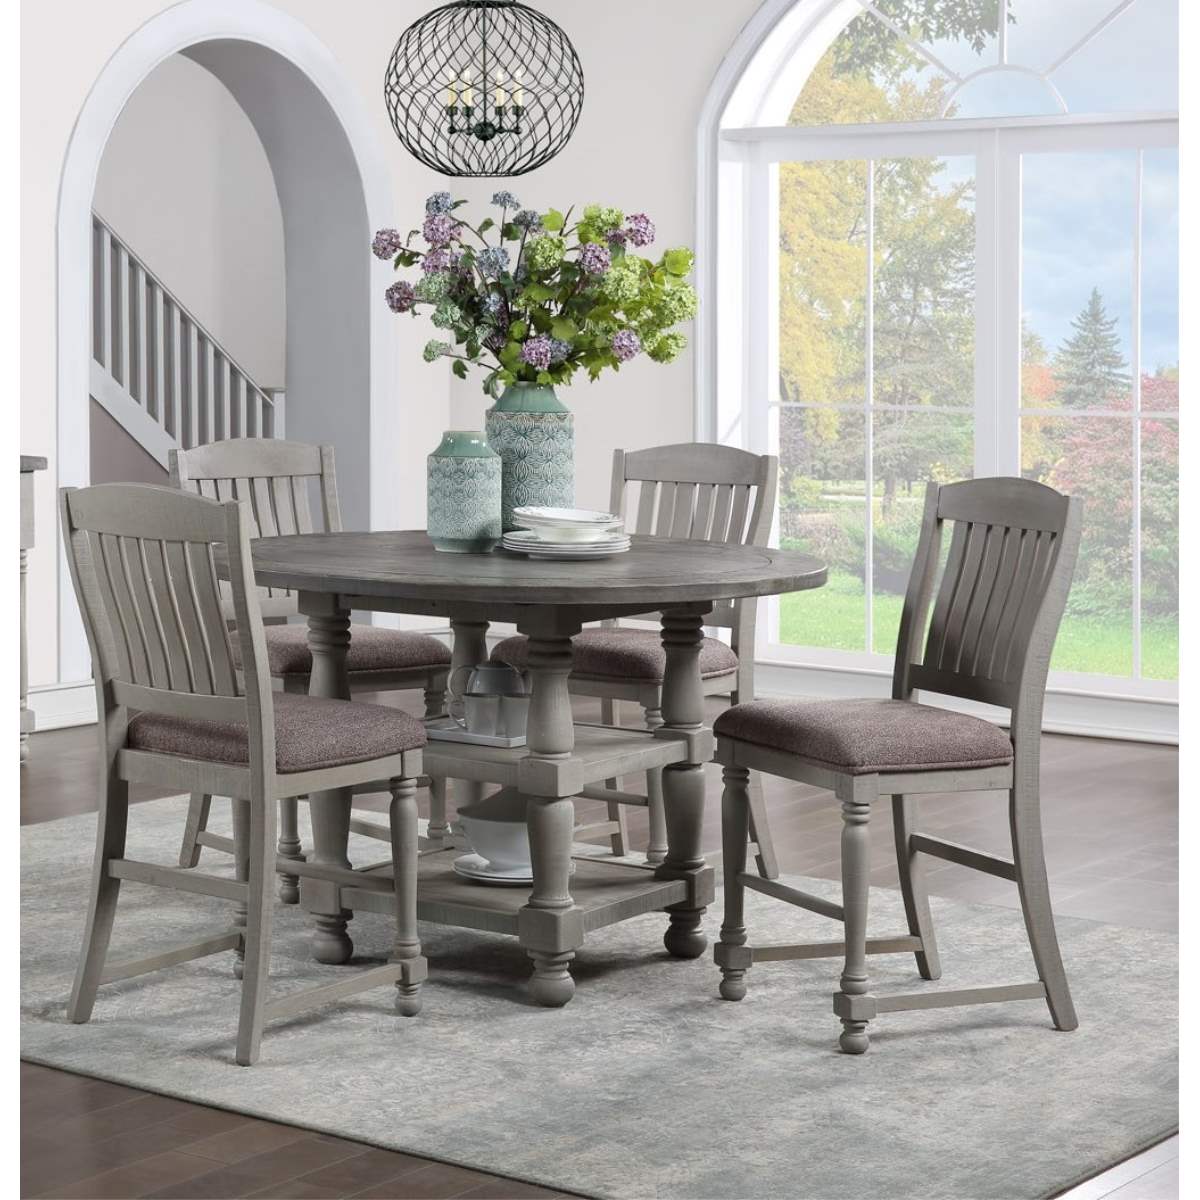 Avalon Richland Ash Round Counter Table and 4 Counter Chairs